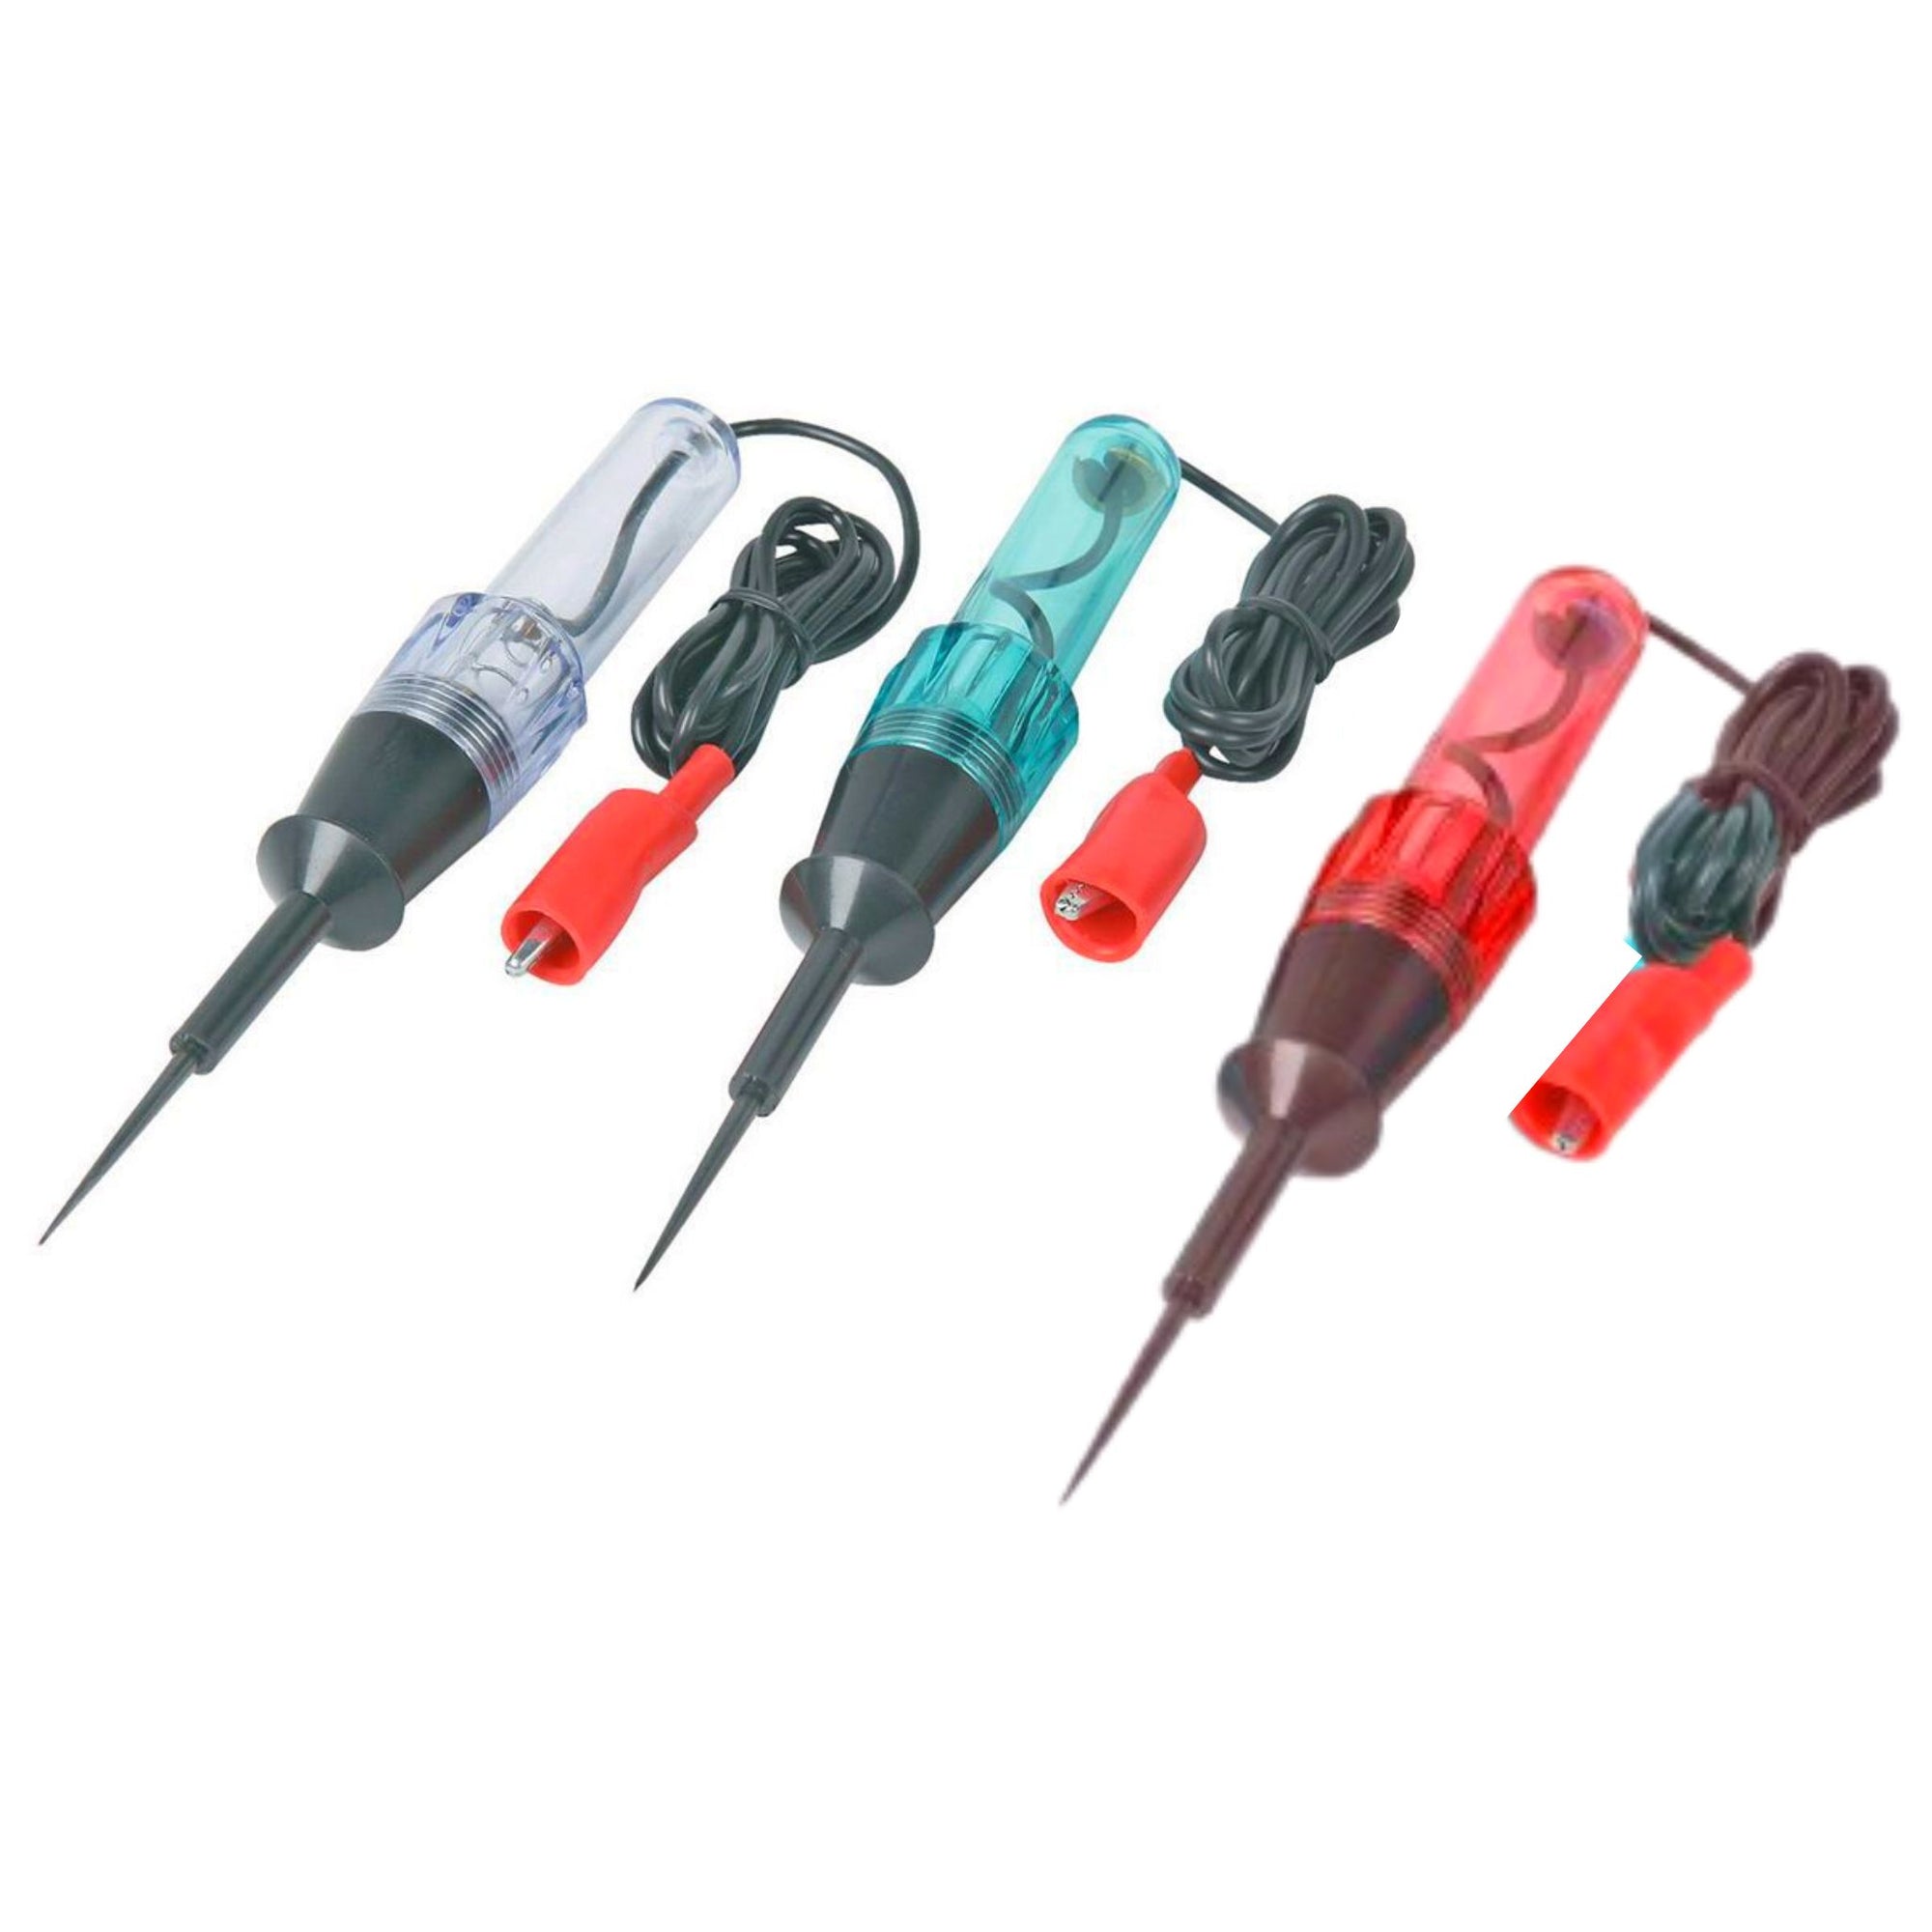 Circuit Tester Set | Continuity Tester | Voltage Tester - 3 Piece set - South East Clearance Centre